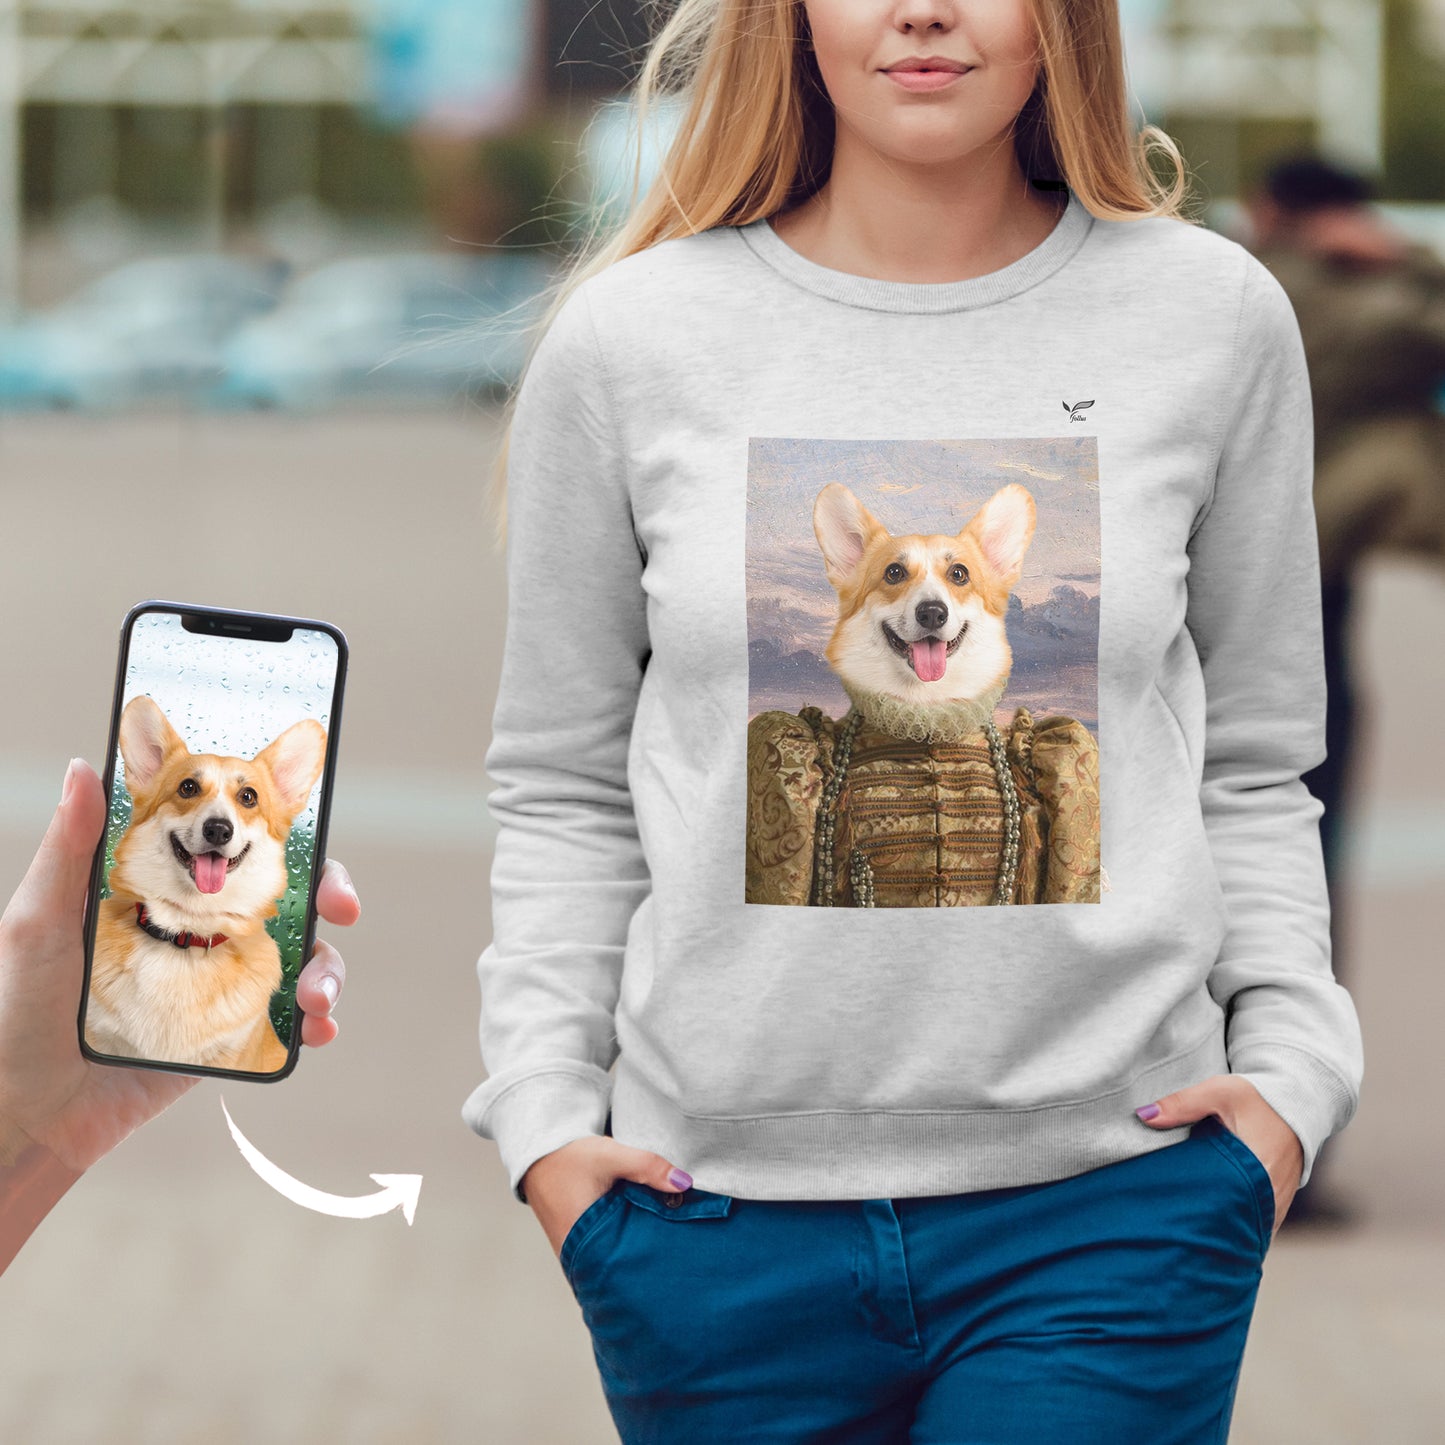 The Beautiful Queen - Personalized Sweatshirt With Your Pet's Photo